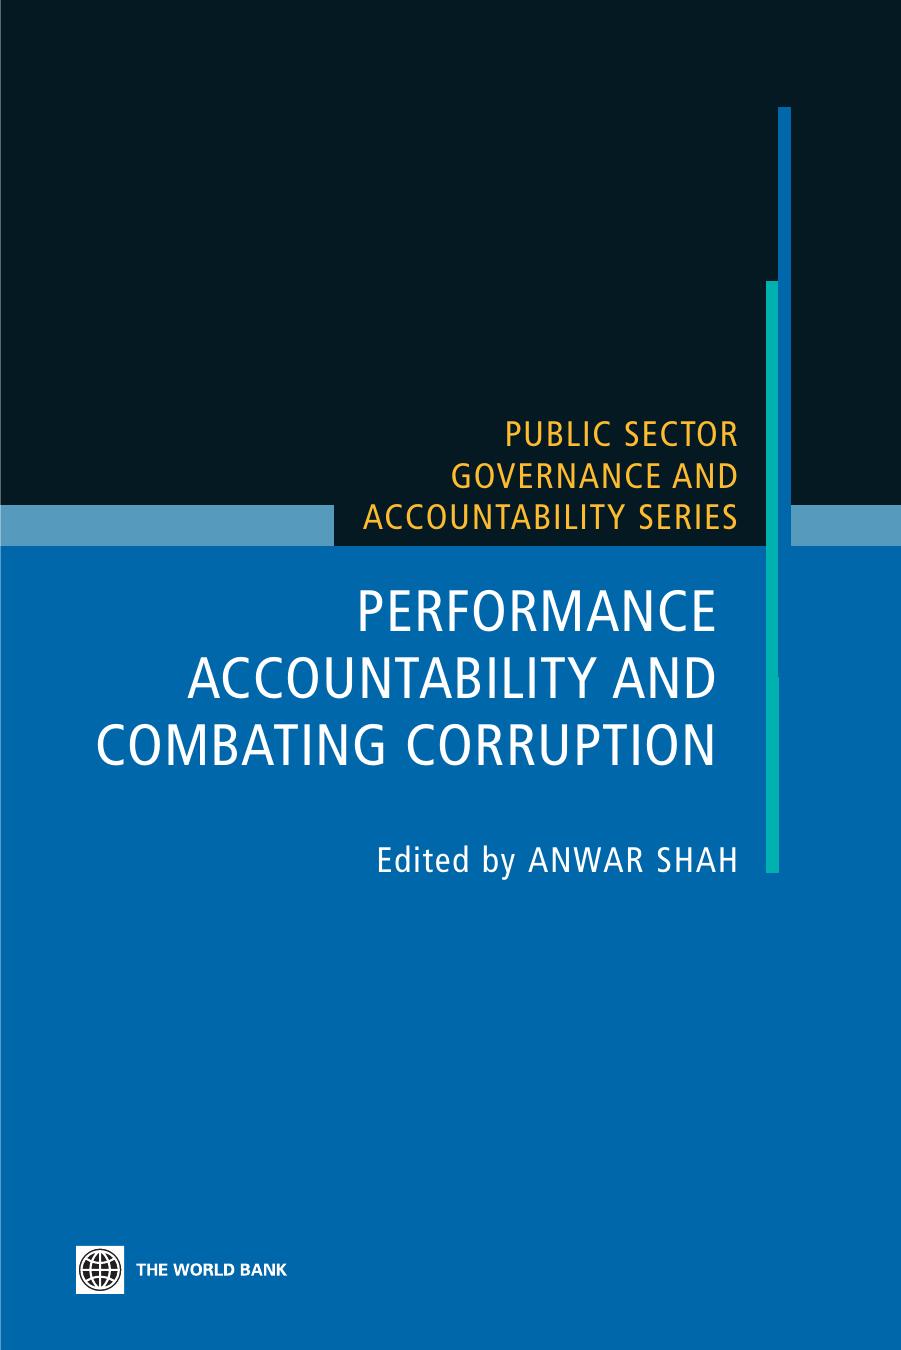 Performance Accountability and Combating Corruption (Public Sector Governance and Accountability) ( PDFDrive )